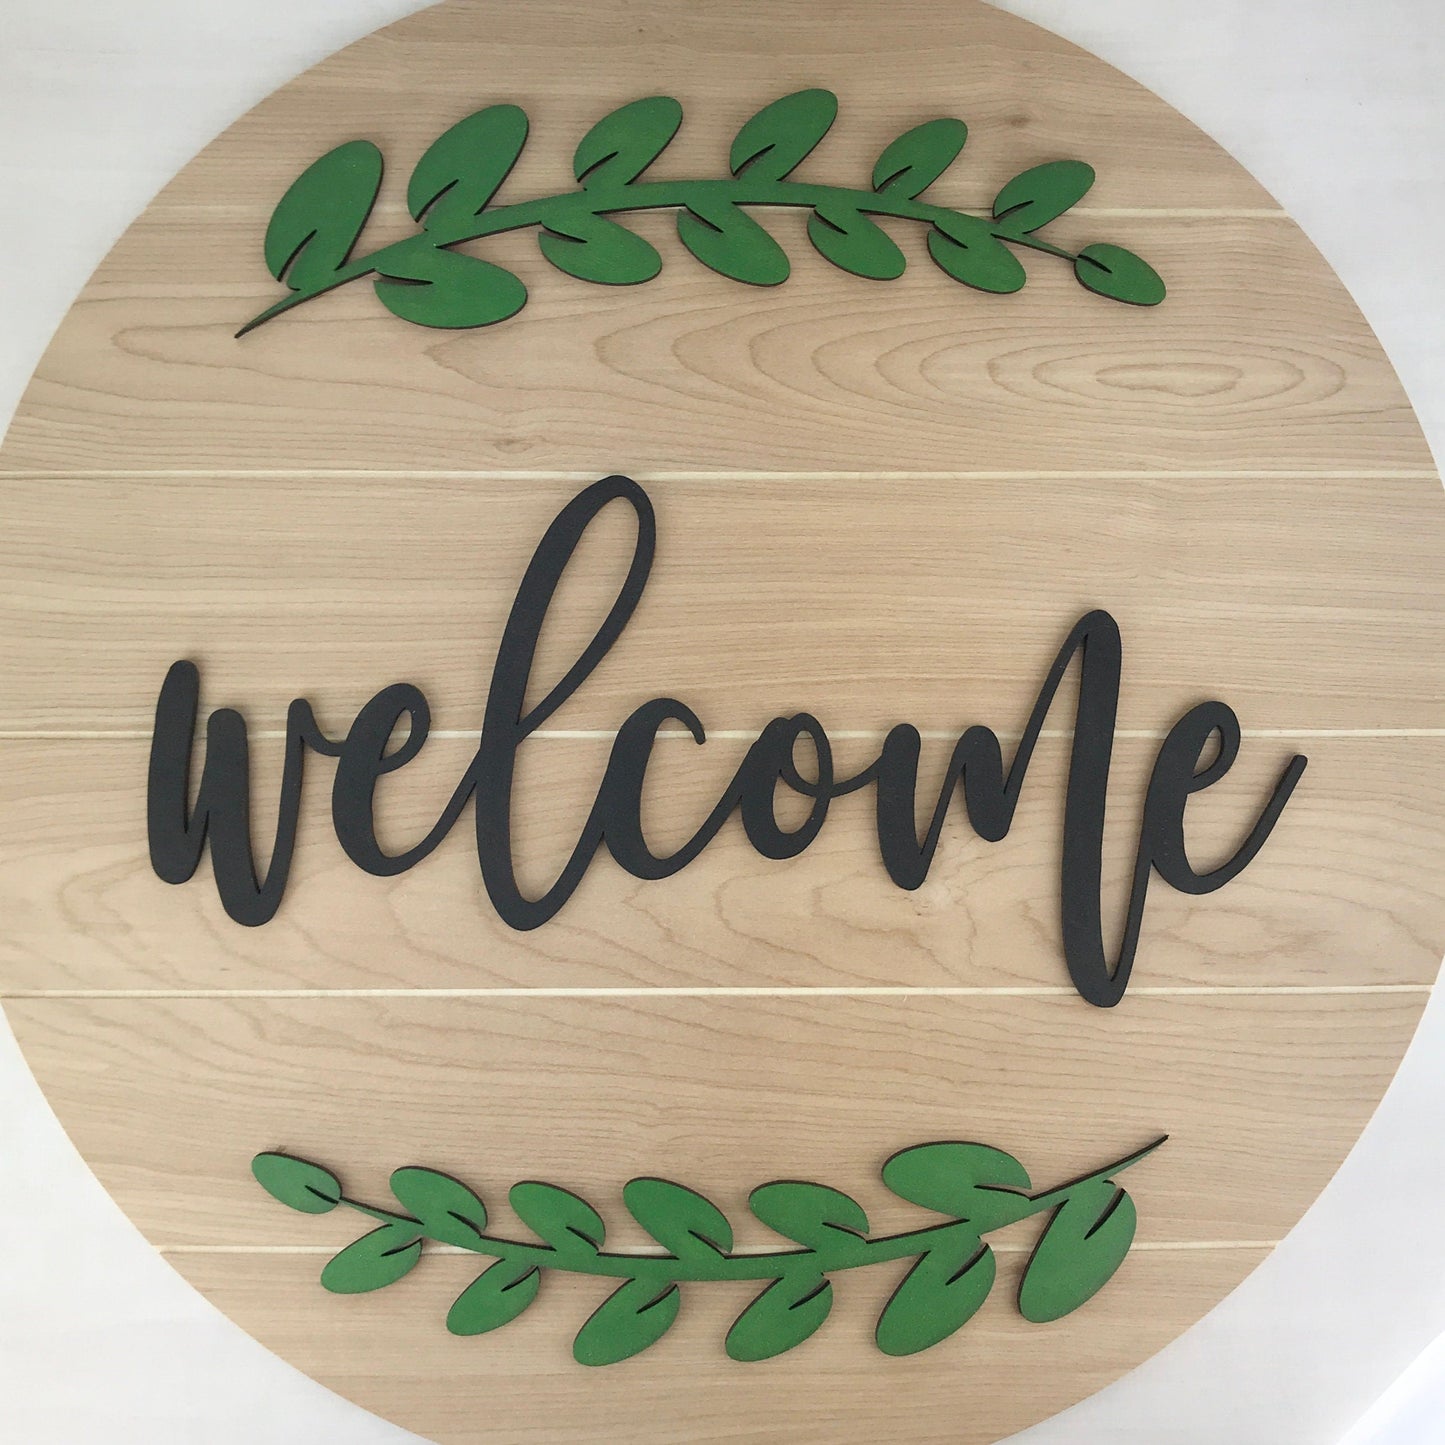 3D Welcome SIgn